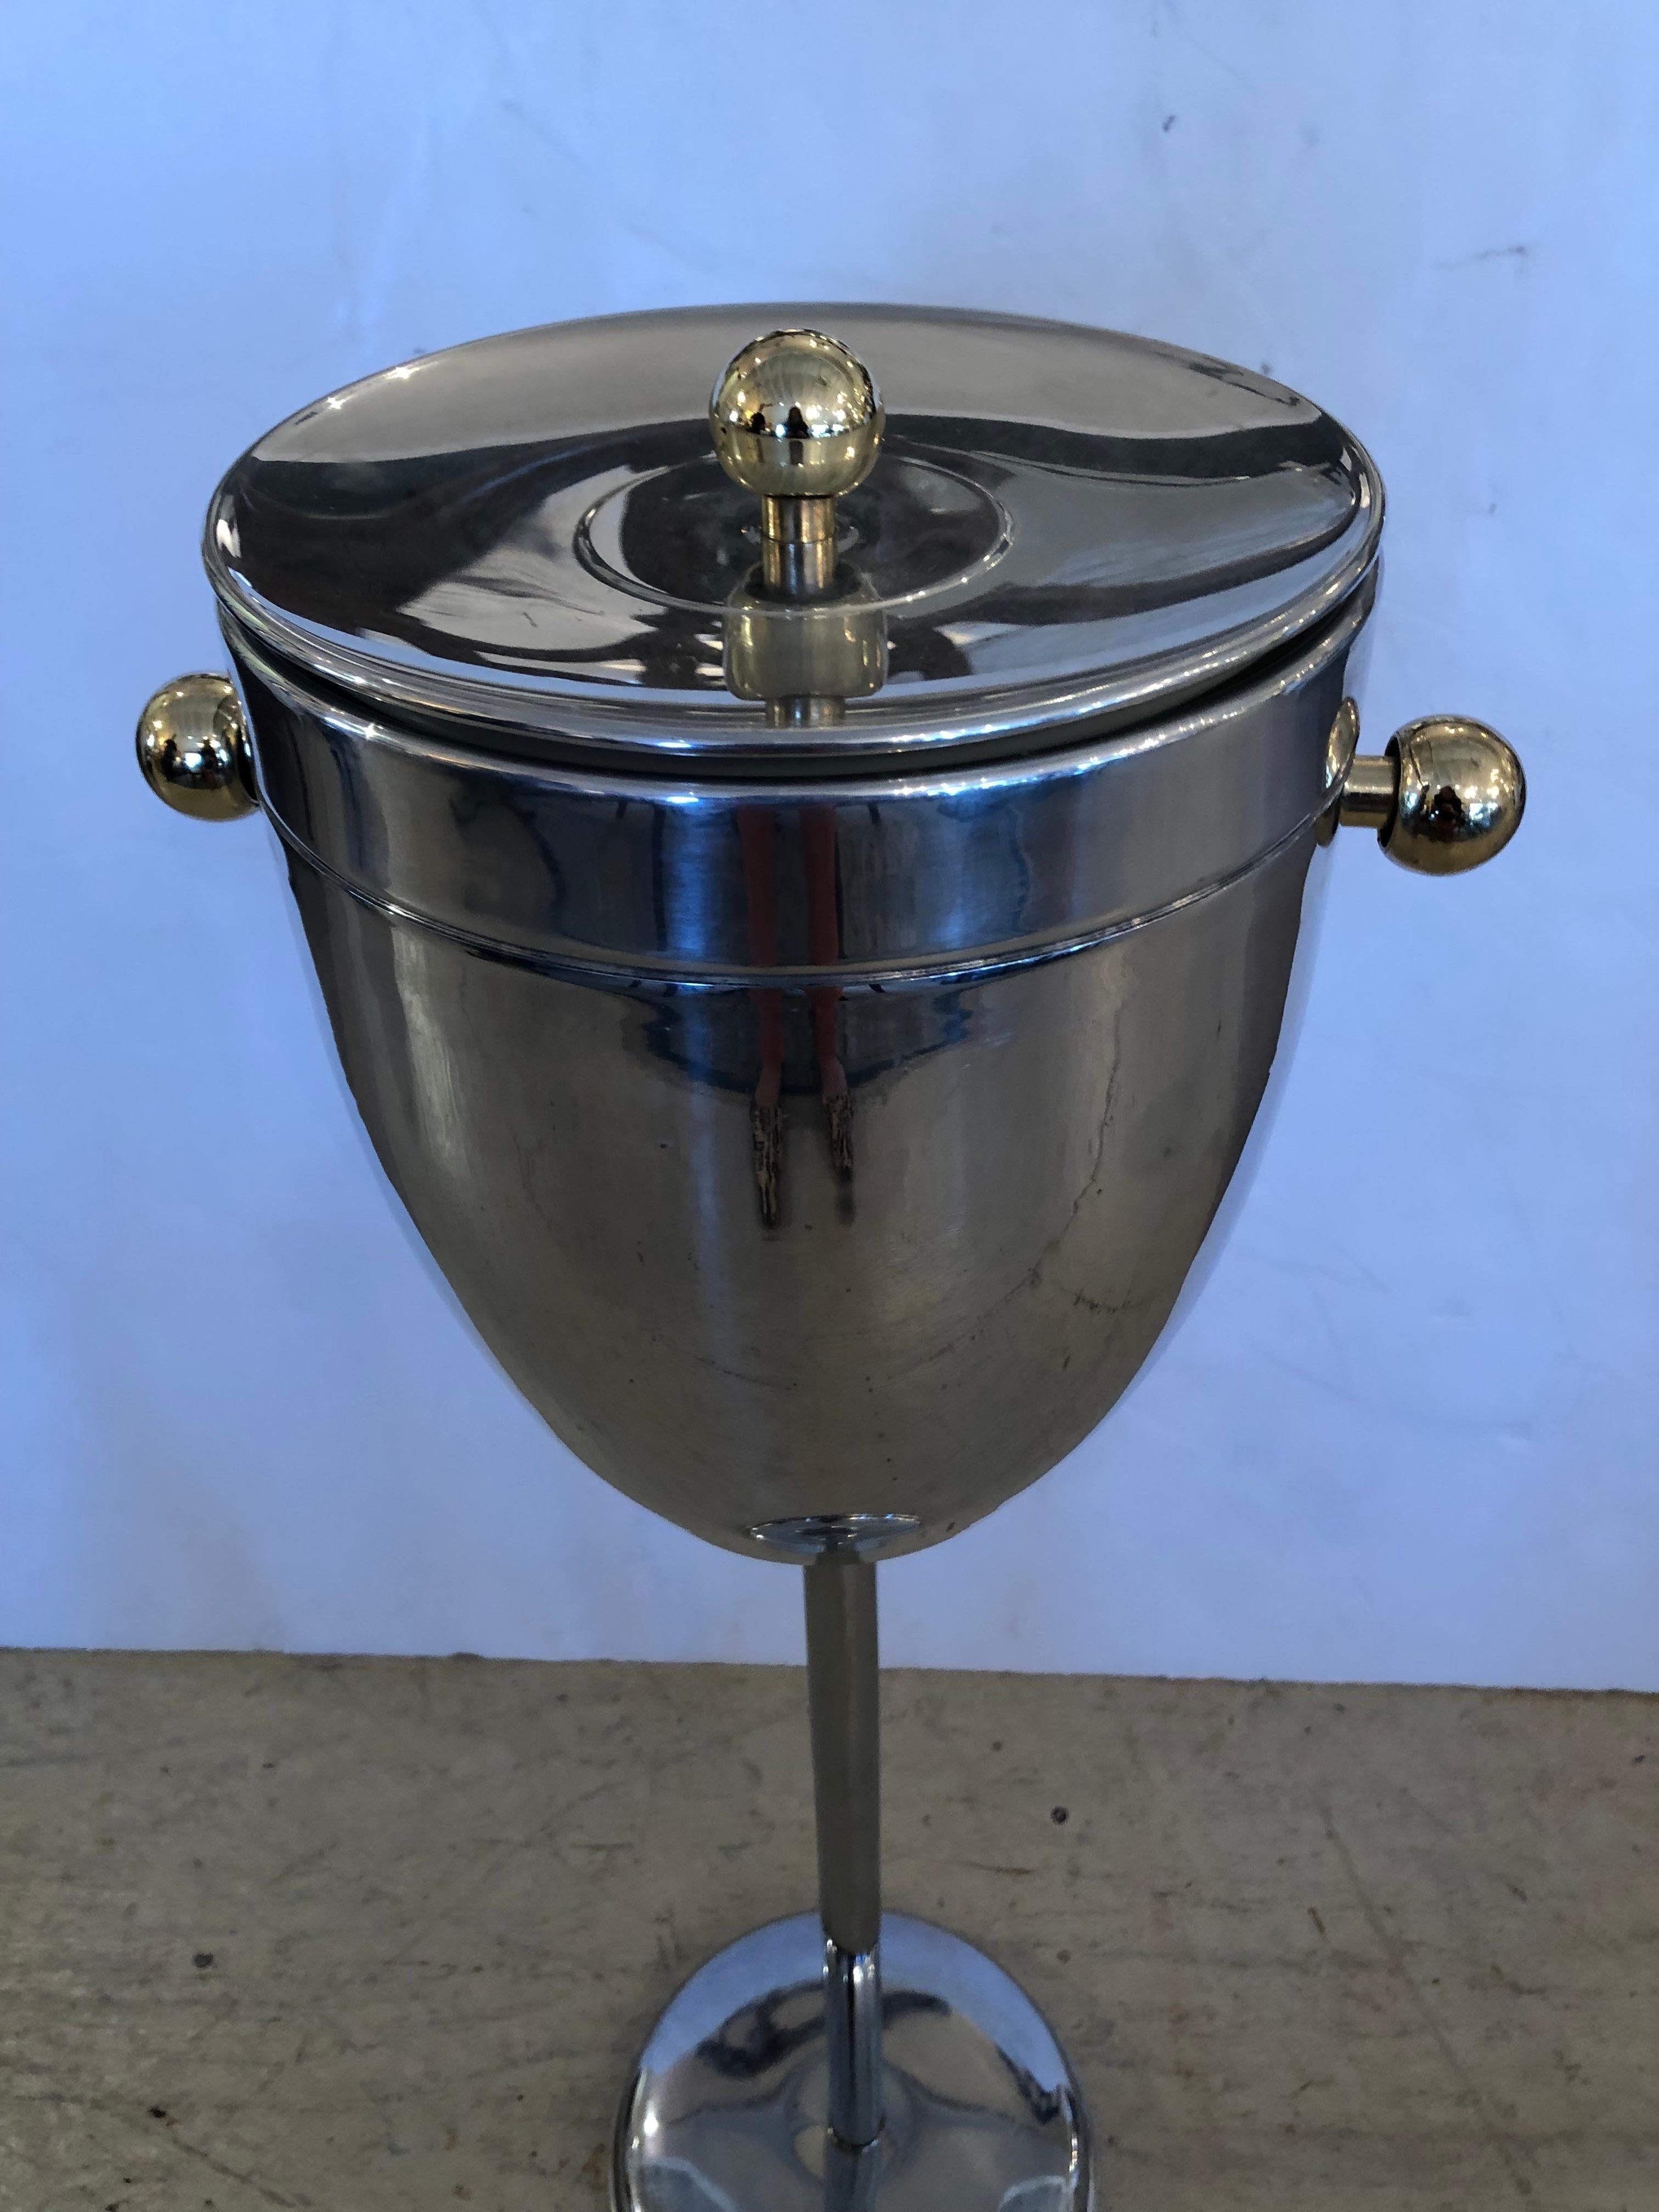 A glamorous and functional midcentury modern chrome champagne ice bucket on a stand having brass shaped ball handles and finial on top.